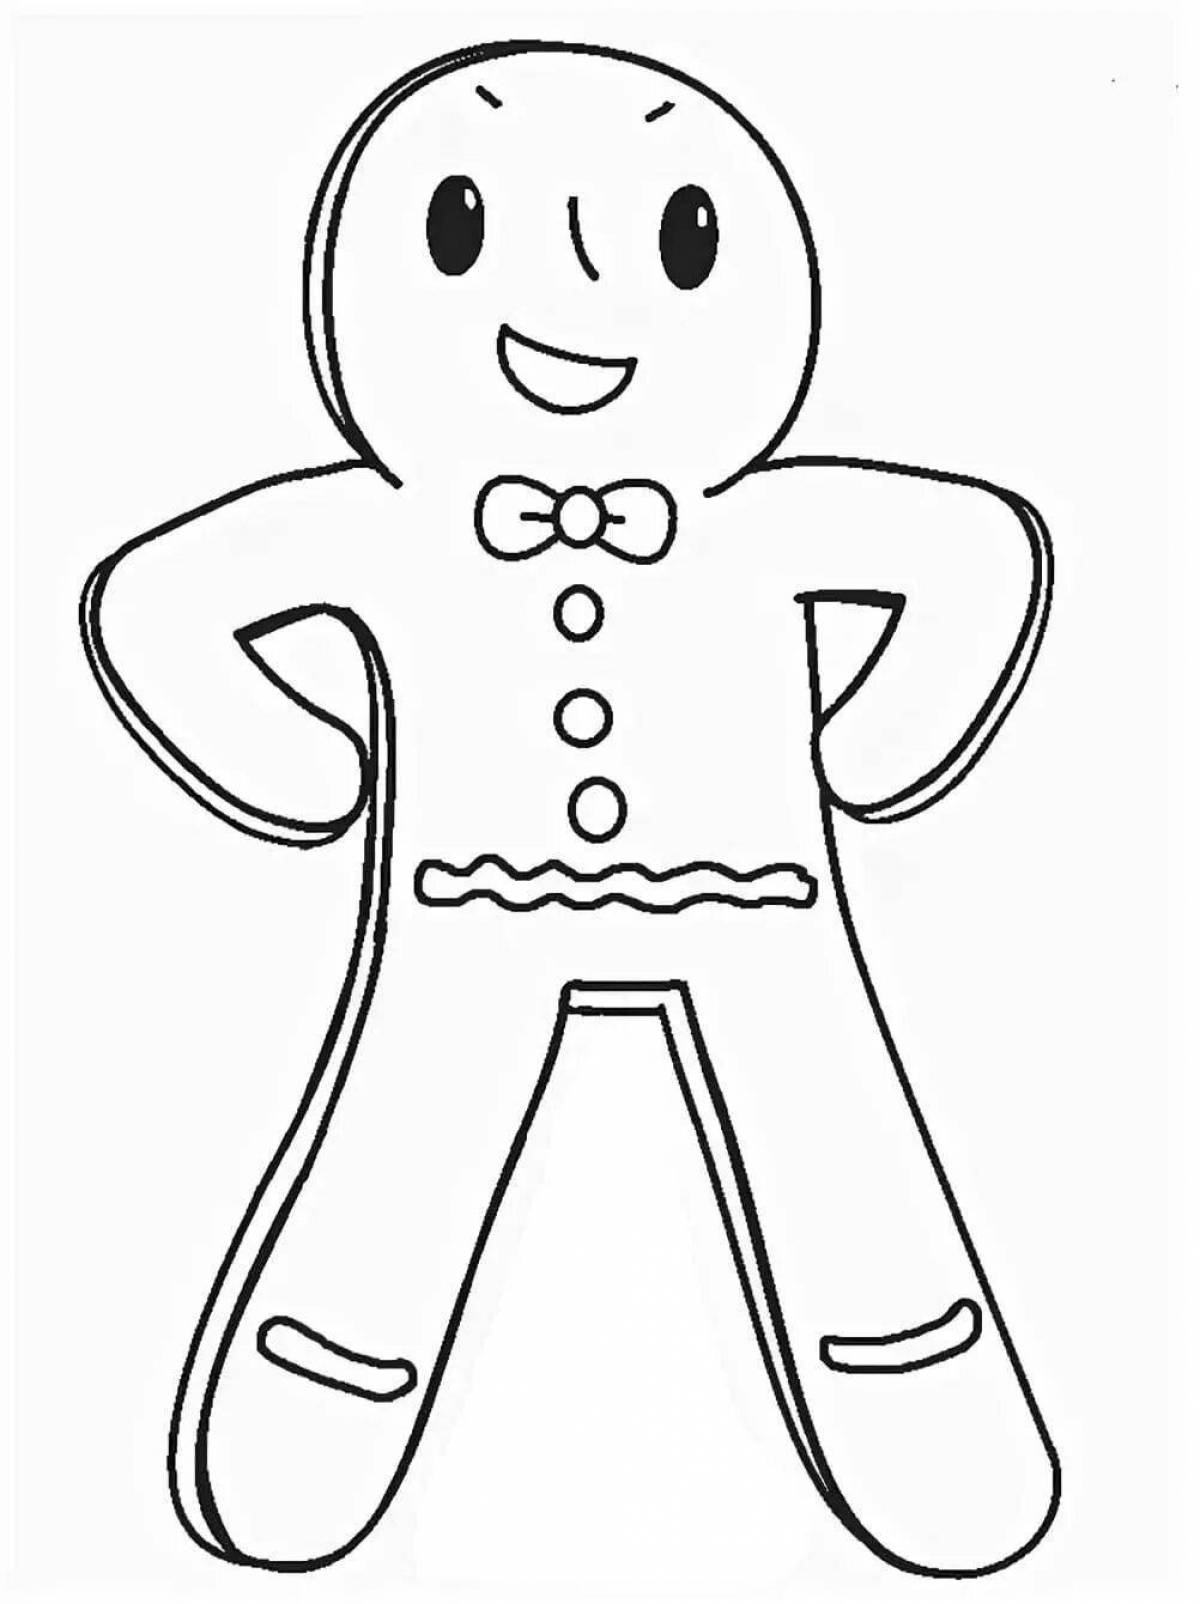 Gingerbread for kids #6